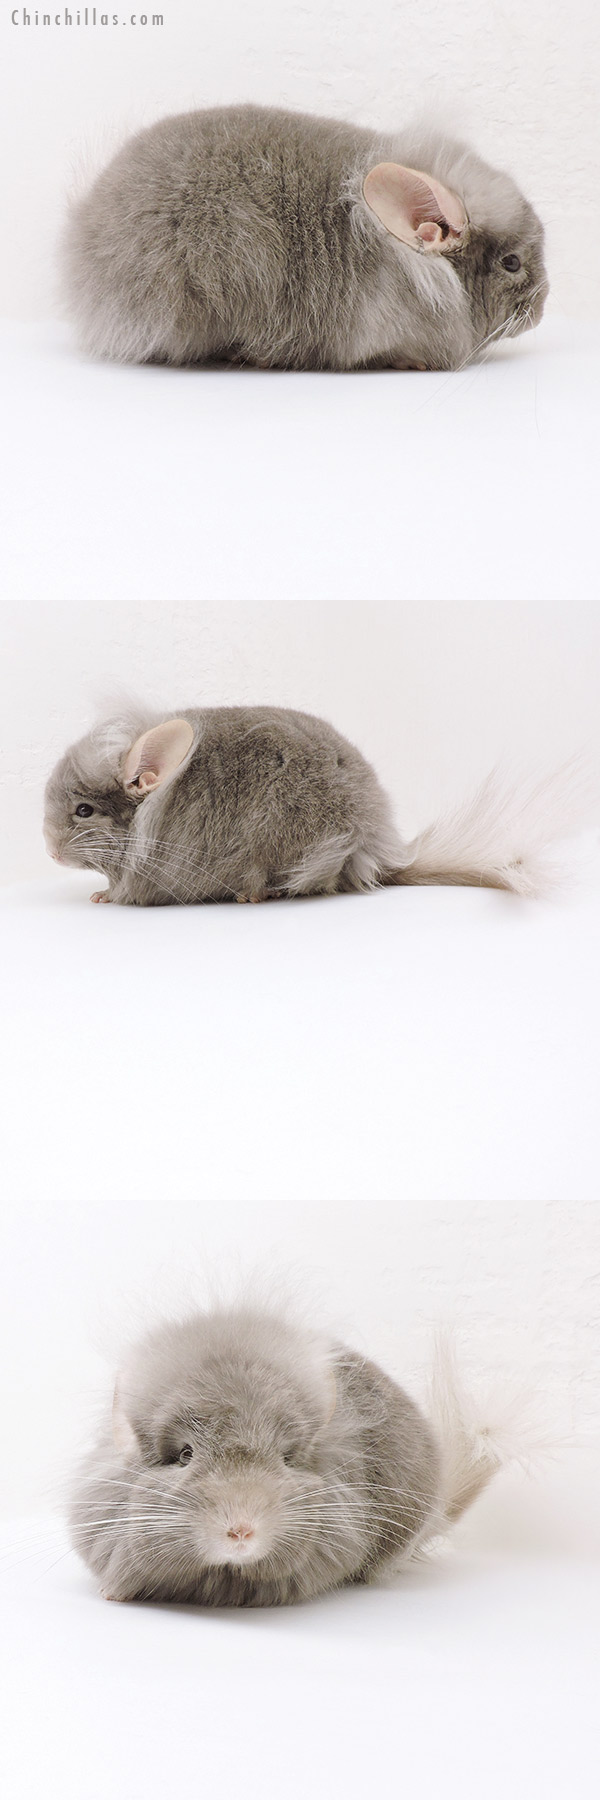 Chinchilla or related item offered for sale or export on Chinchillas.com - 19189 Exceptional Tan ( Locken Carrier ) G3  Royal Persian Angora Male Chinchilla